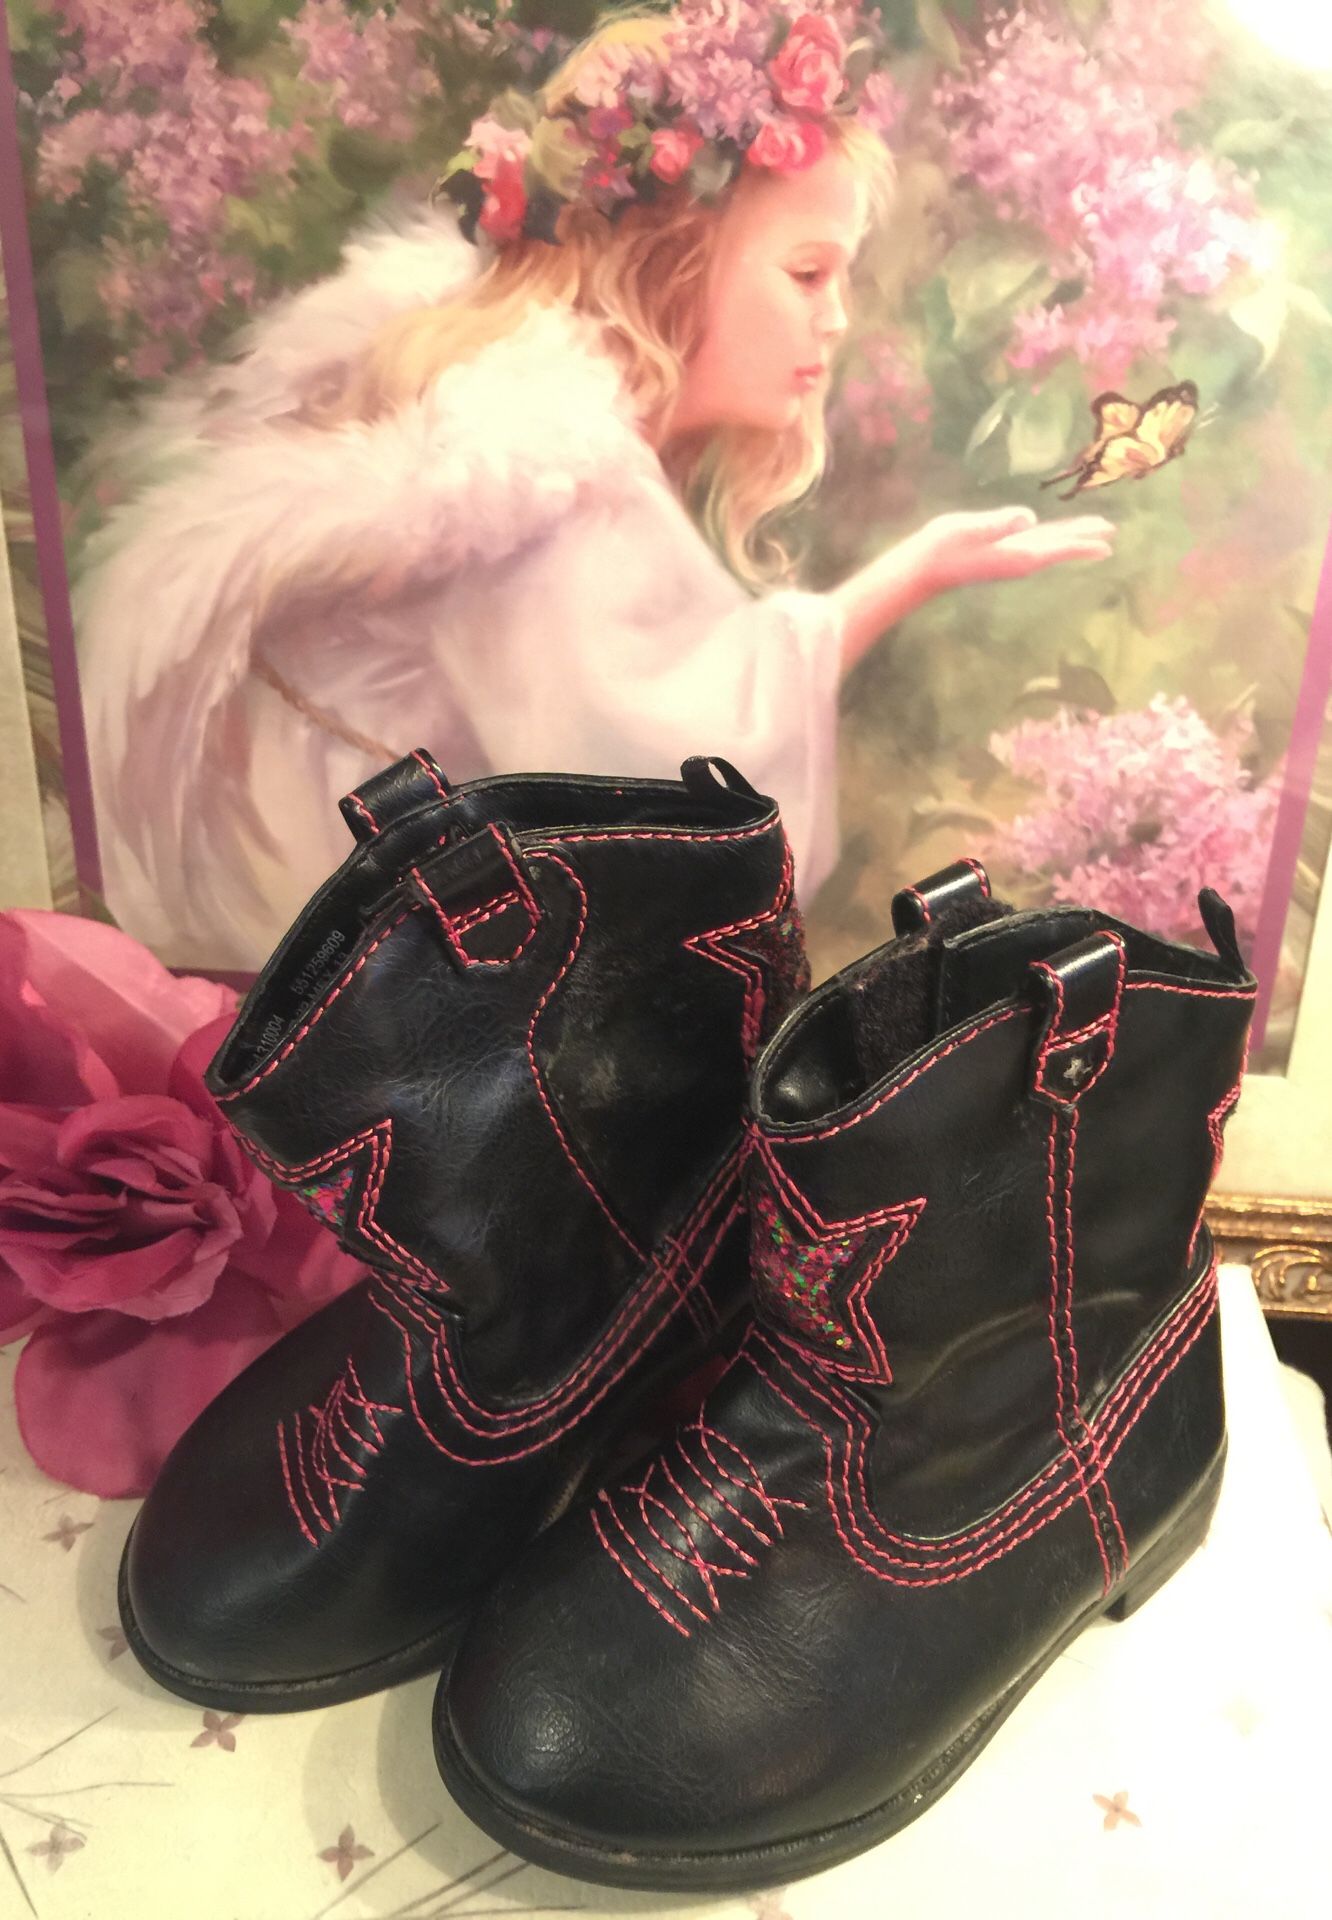 Little girls cute Cowgirl boots “ black with pink thread-design Euc. Size(6) slip on faux leather